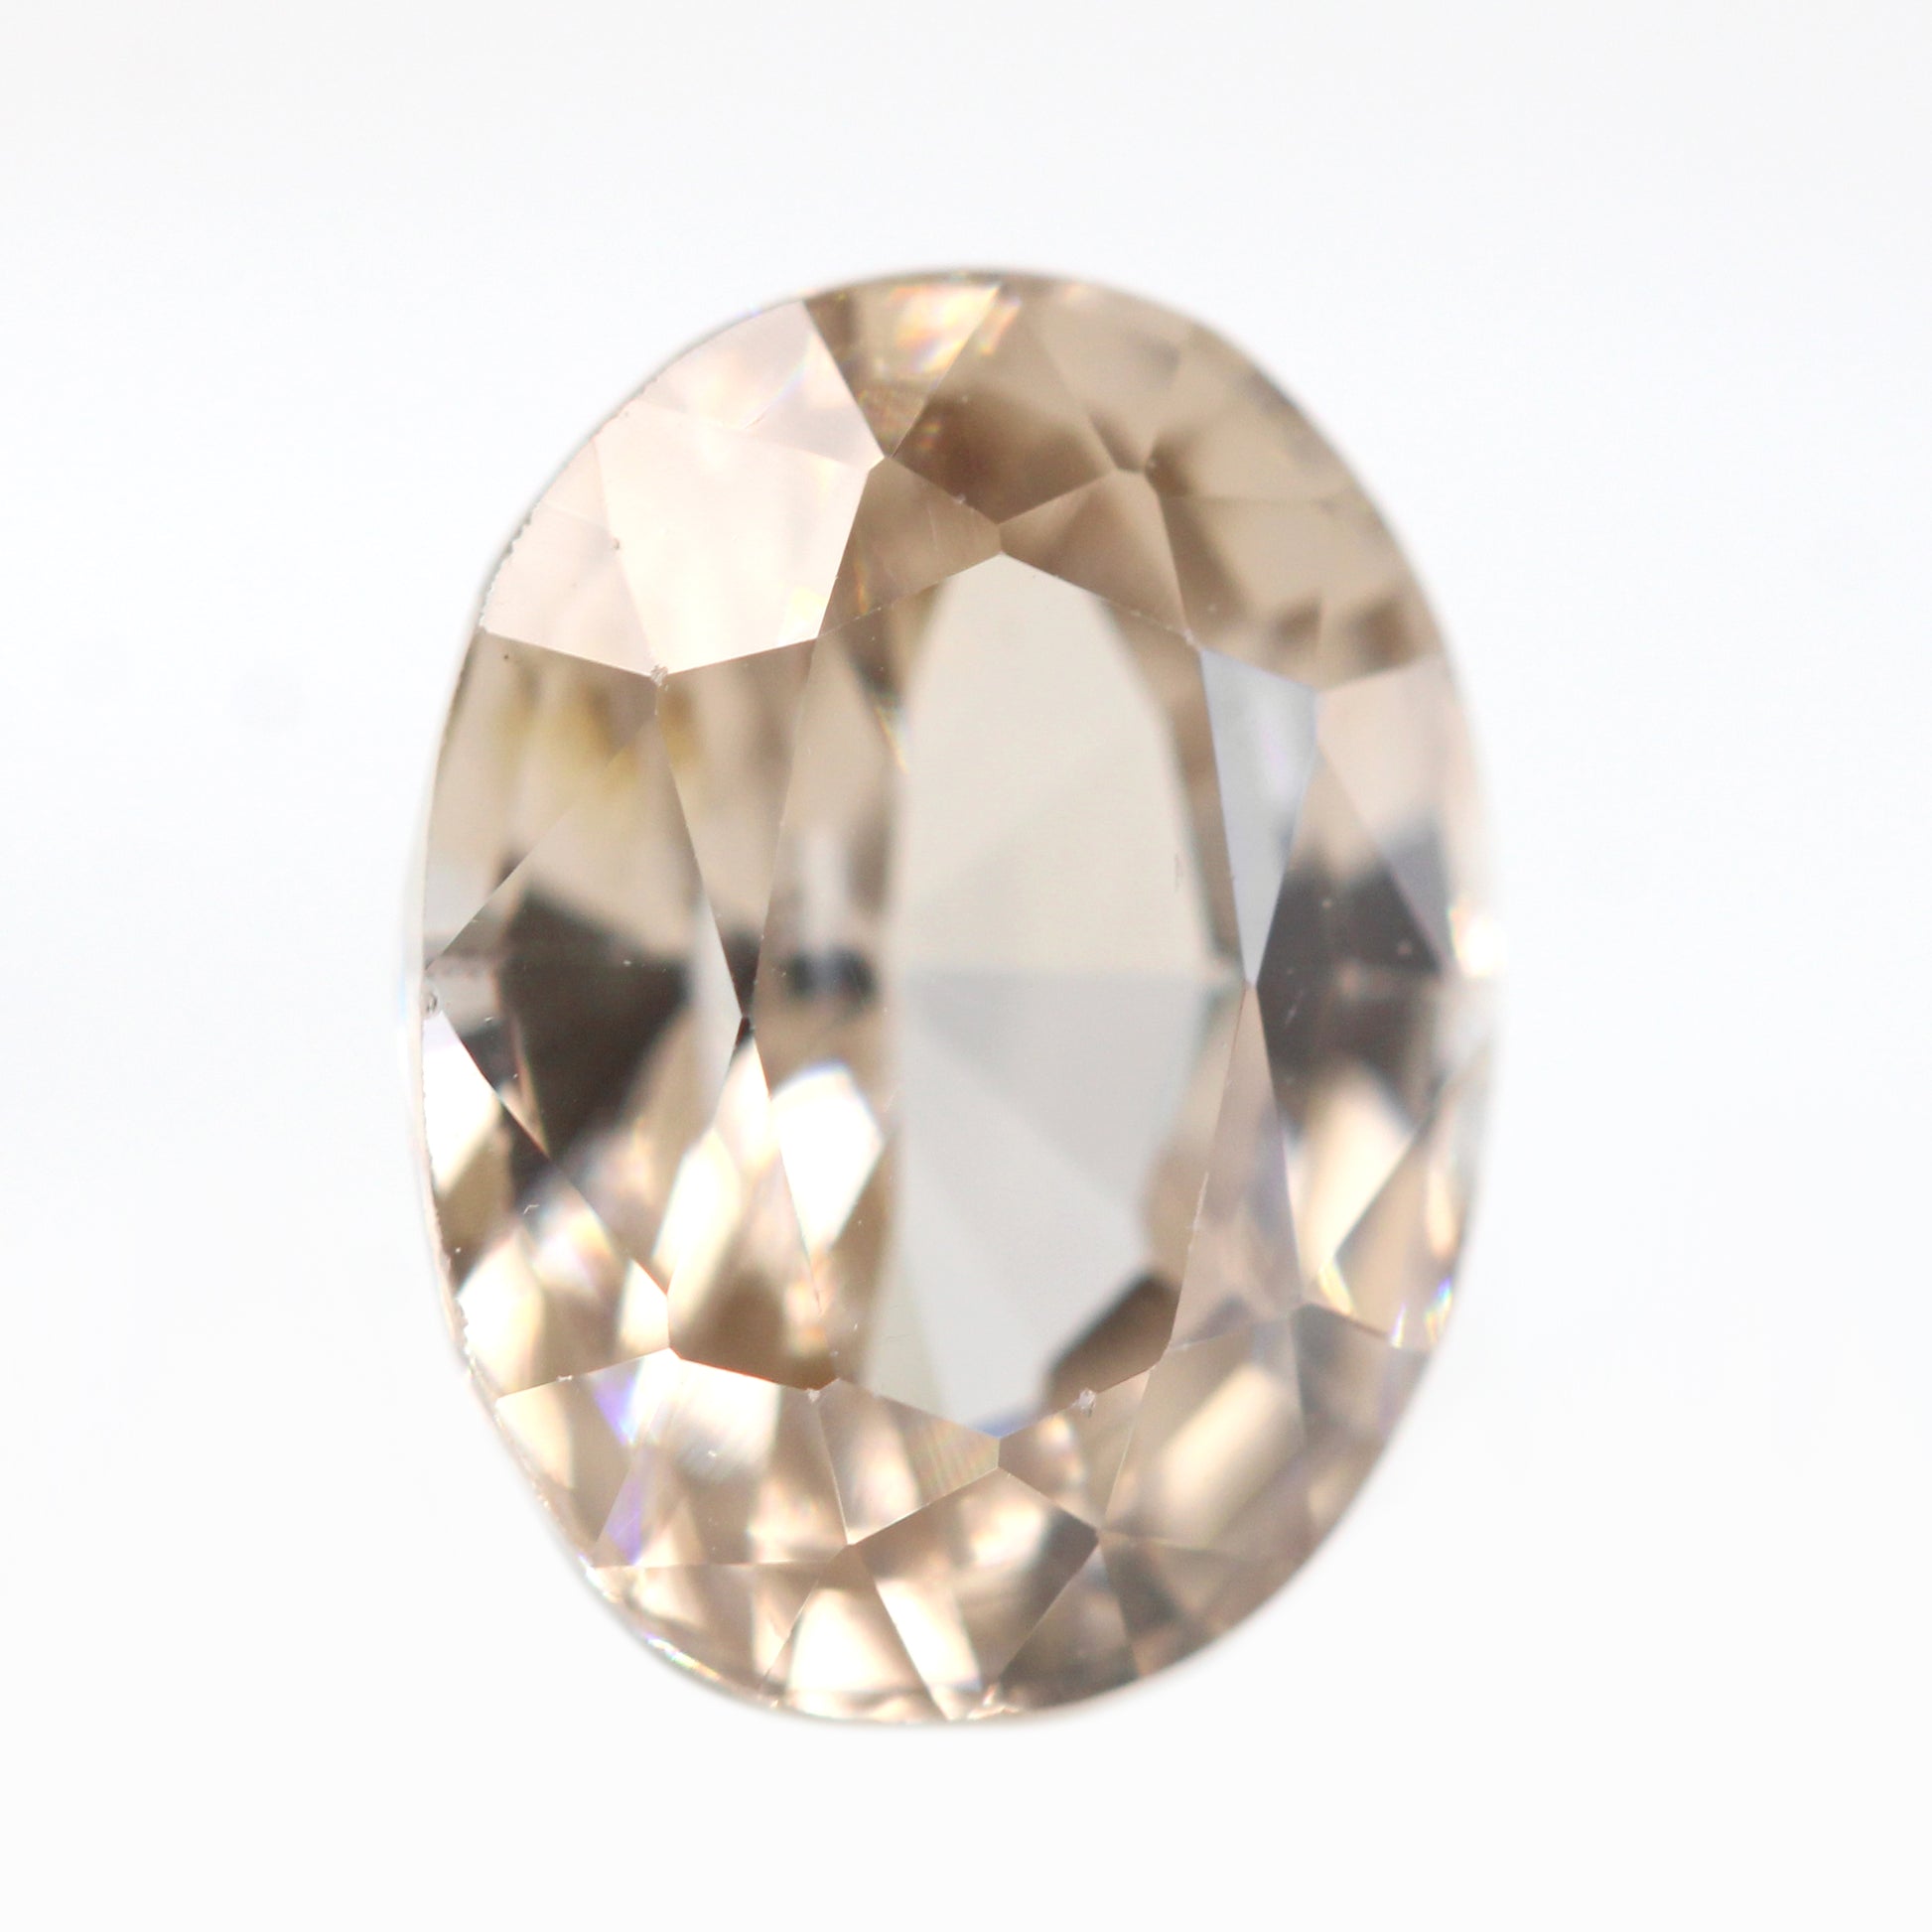 3.05 Carat Golden Light Peach Champagne Oval Sapphire for Custom Work - Inventory Code COS305 - Midwinter Co. Alternative Bridal Rings and Modern Fine Jewelry